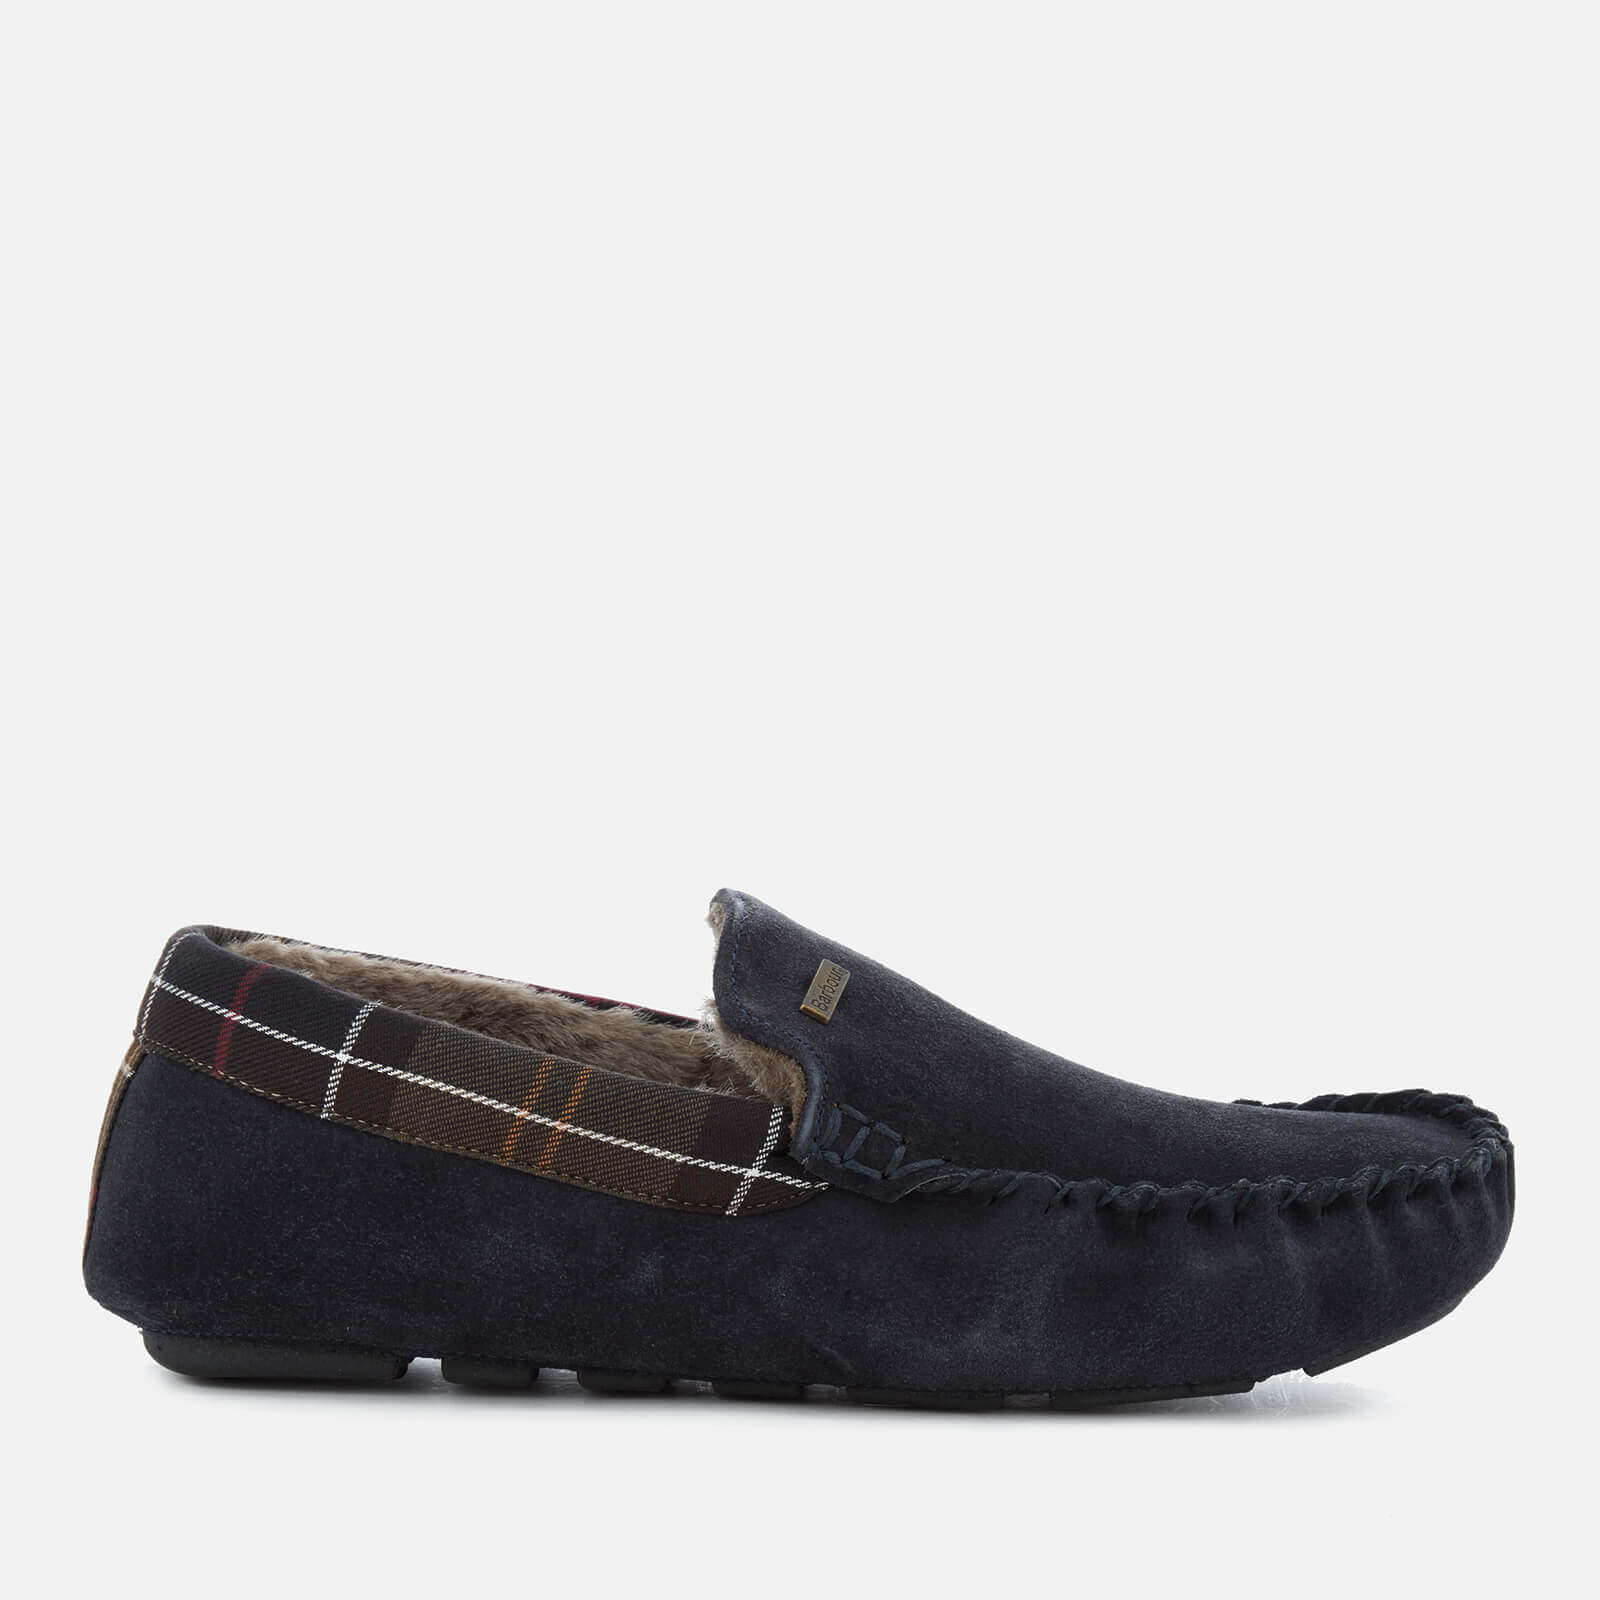 Barbour Monty faux fur lined slippers in navy Navy